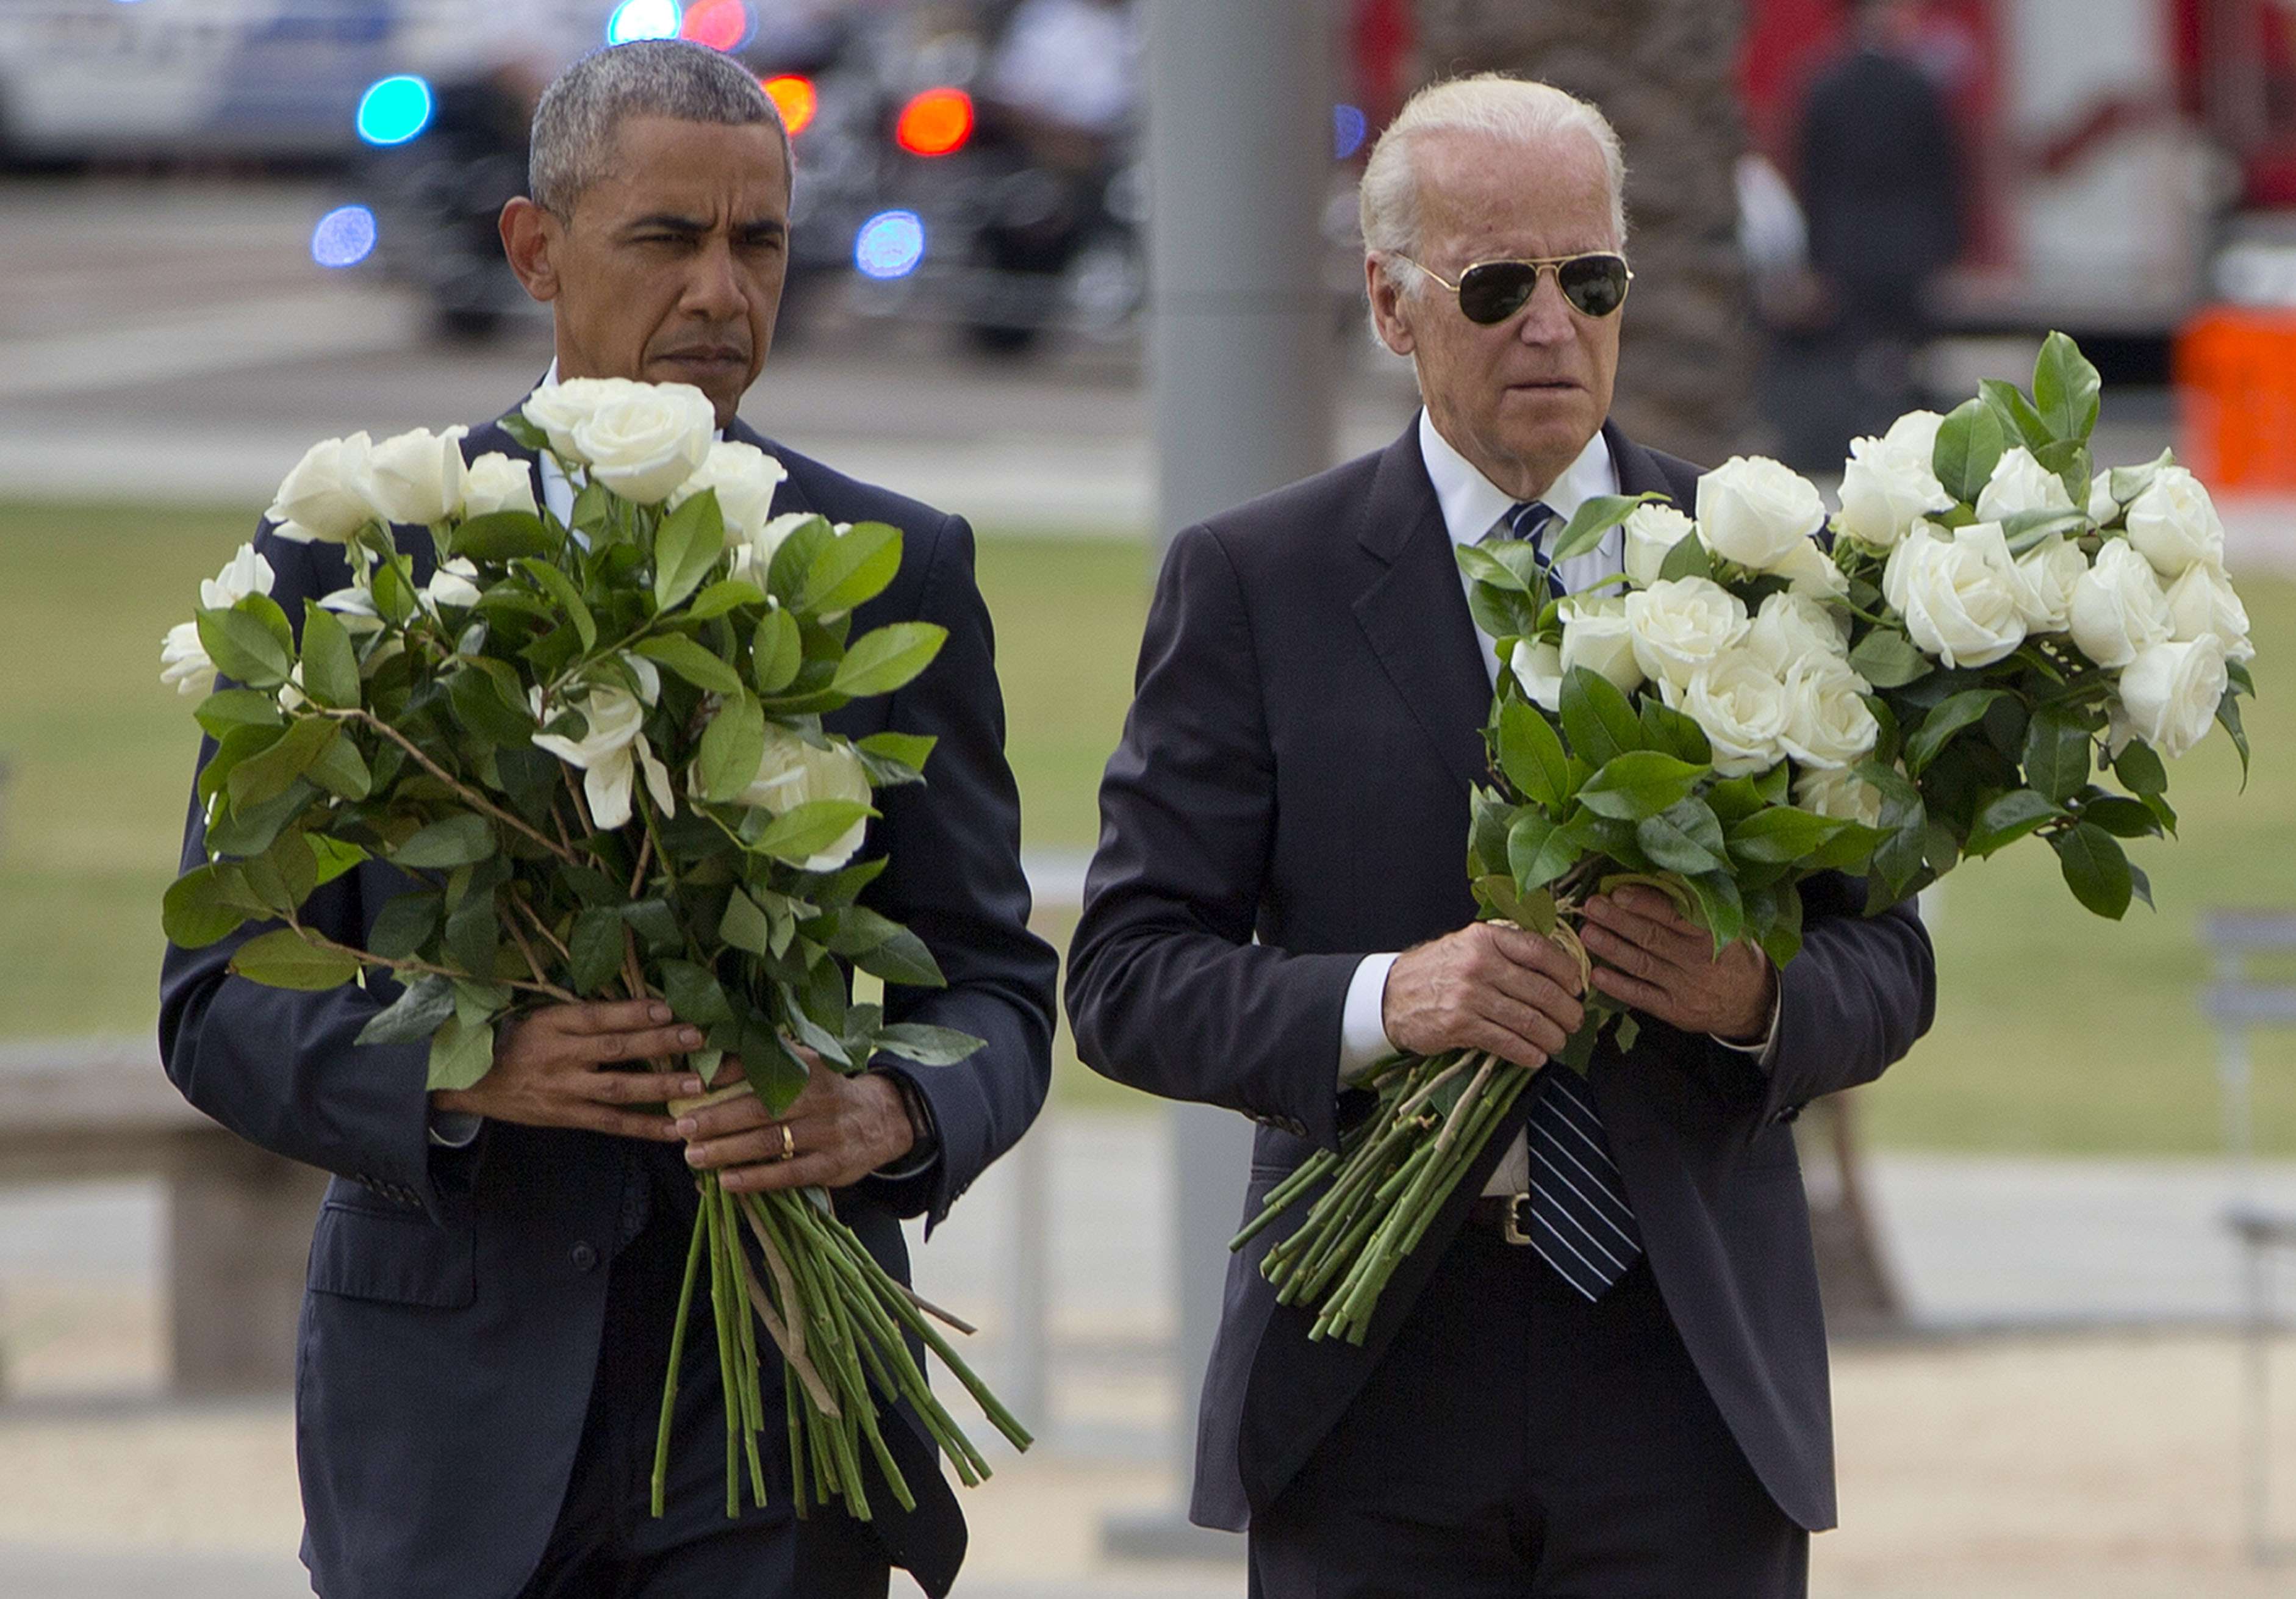 US President Barack Obama with Vice-President Joe Biden carry bouquets comprised of a total of 49 white roses, one in honor of each of the deceased victims, as they visit a memorial to the victims of the Pulse nightclub shooting on Thursday in Orlando, Florida. Photo: AP